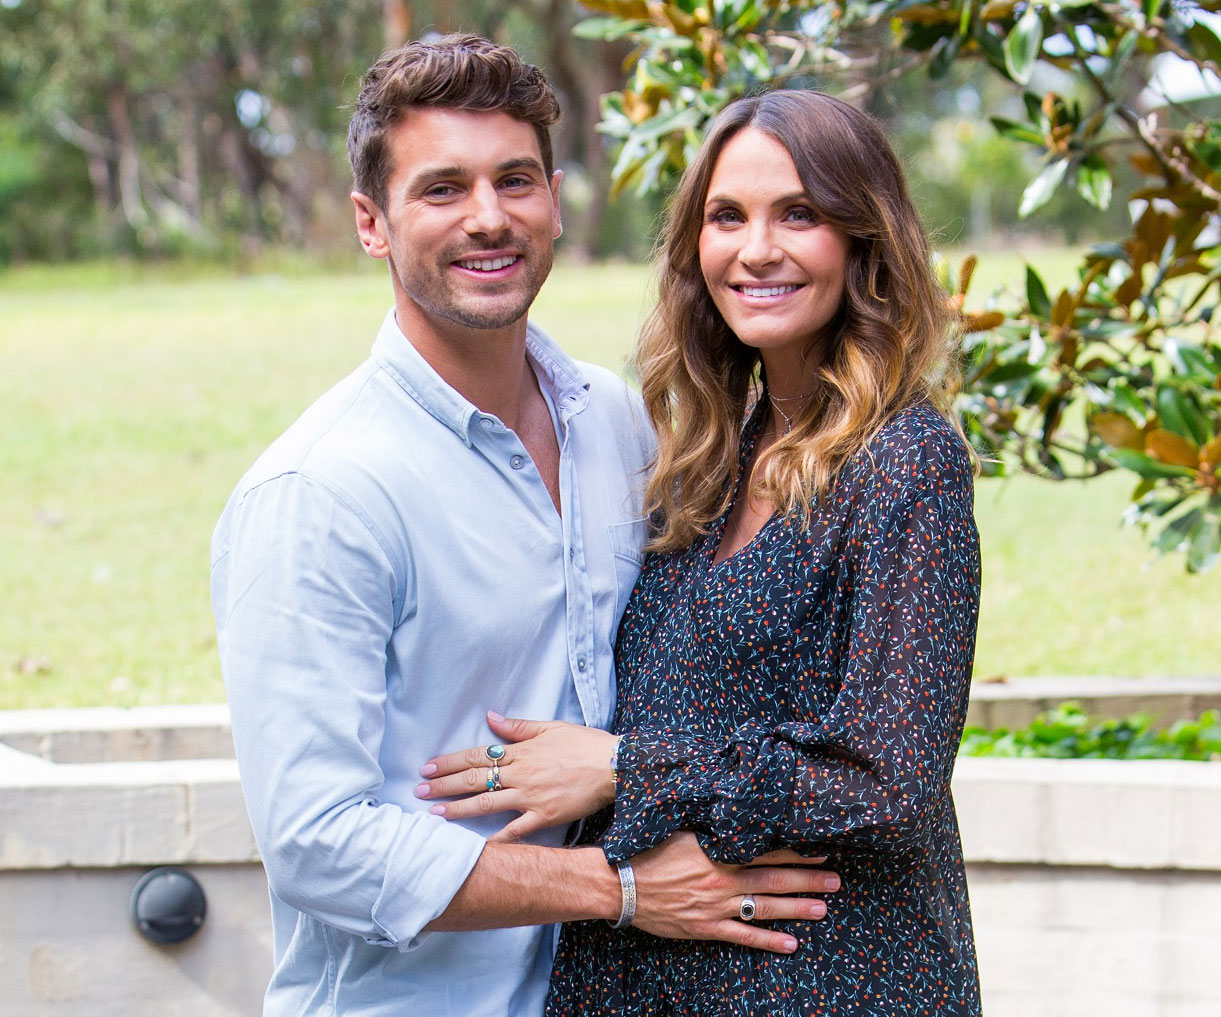 Bachelor All-Stars Laura Byrne and Matty J spill on their upcoming cameo